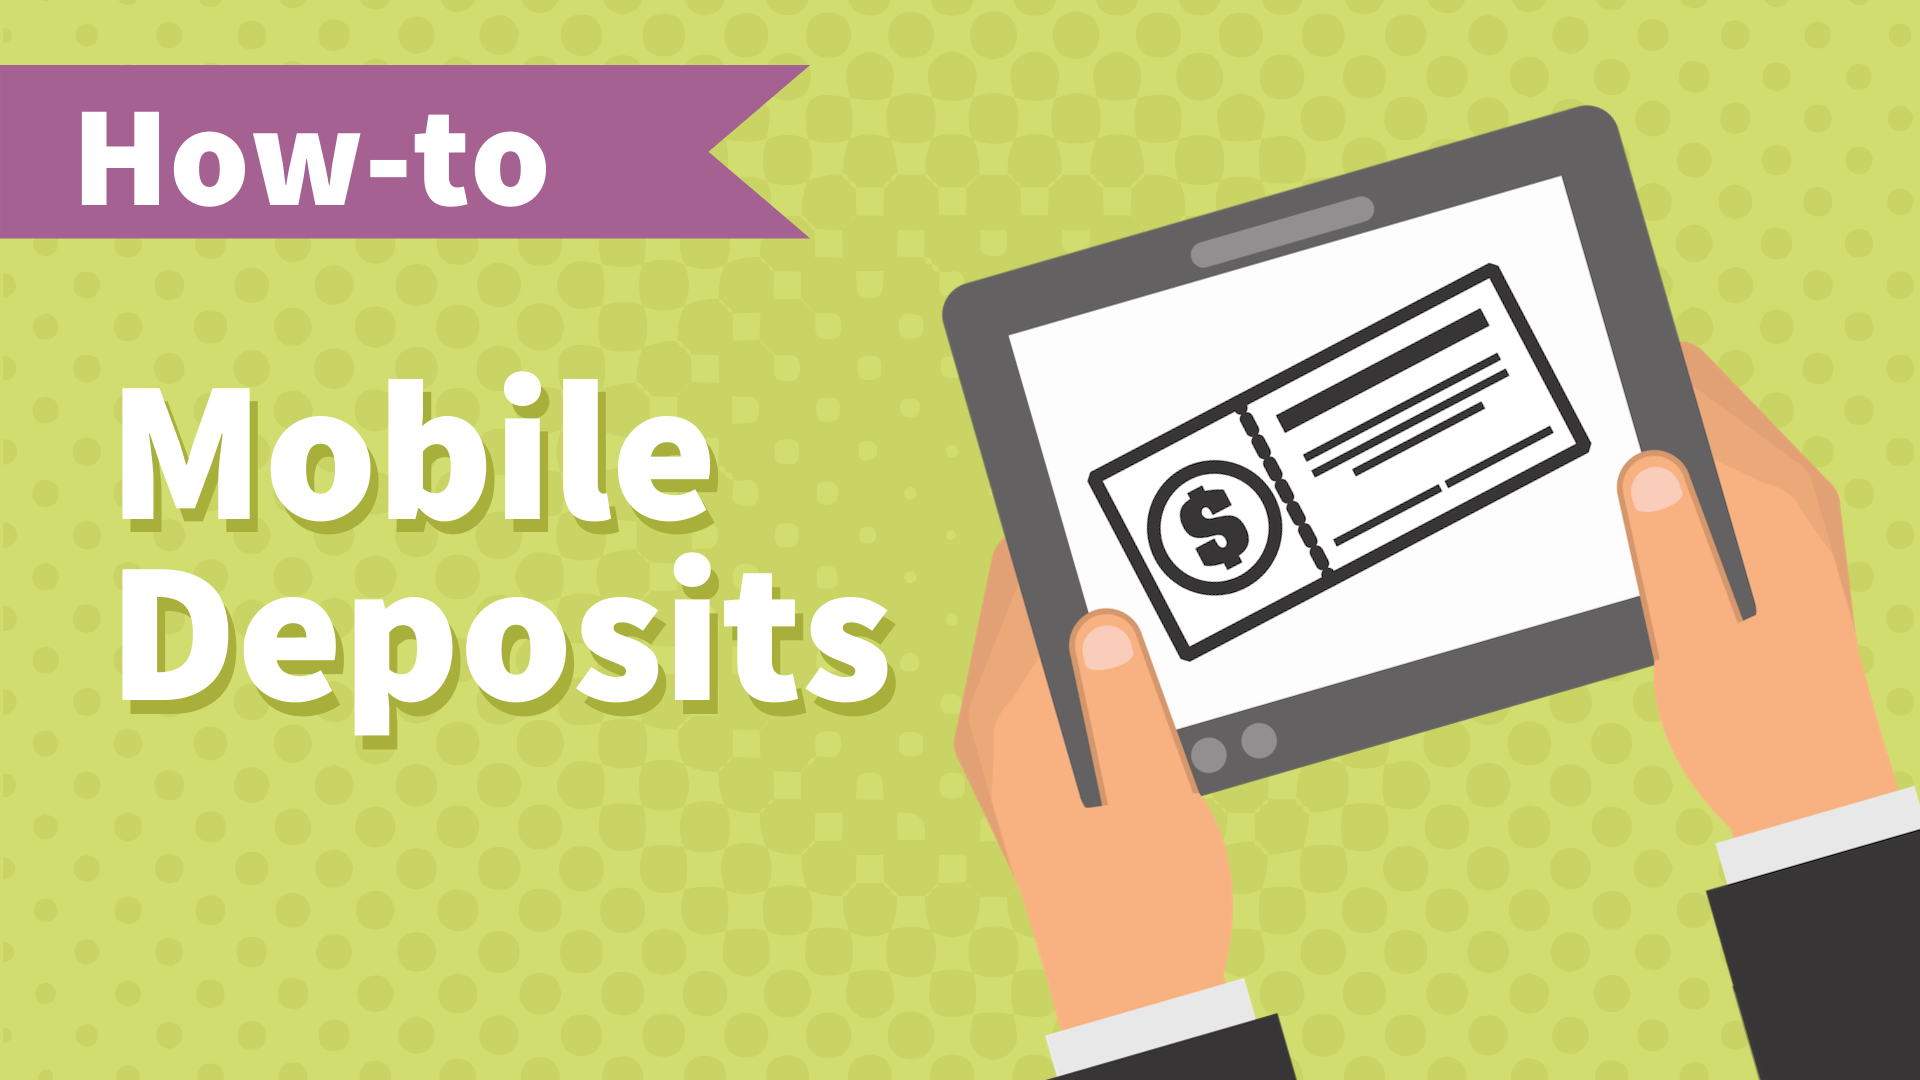 How to do it - Mobile Deposits